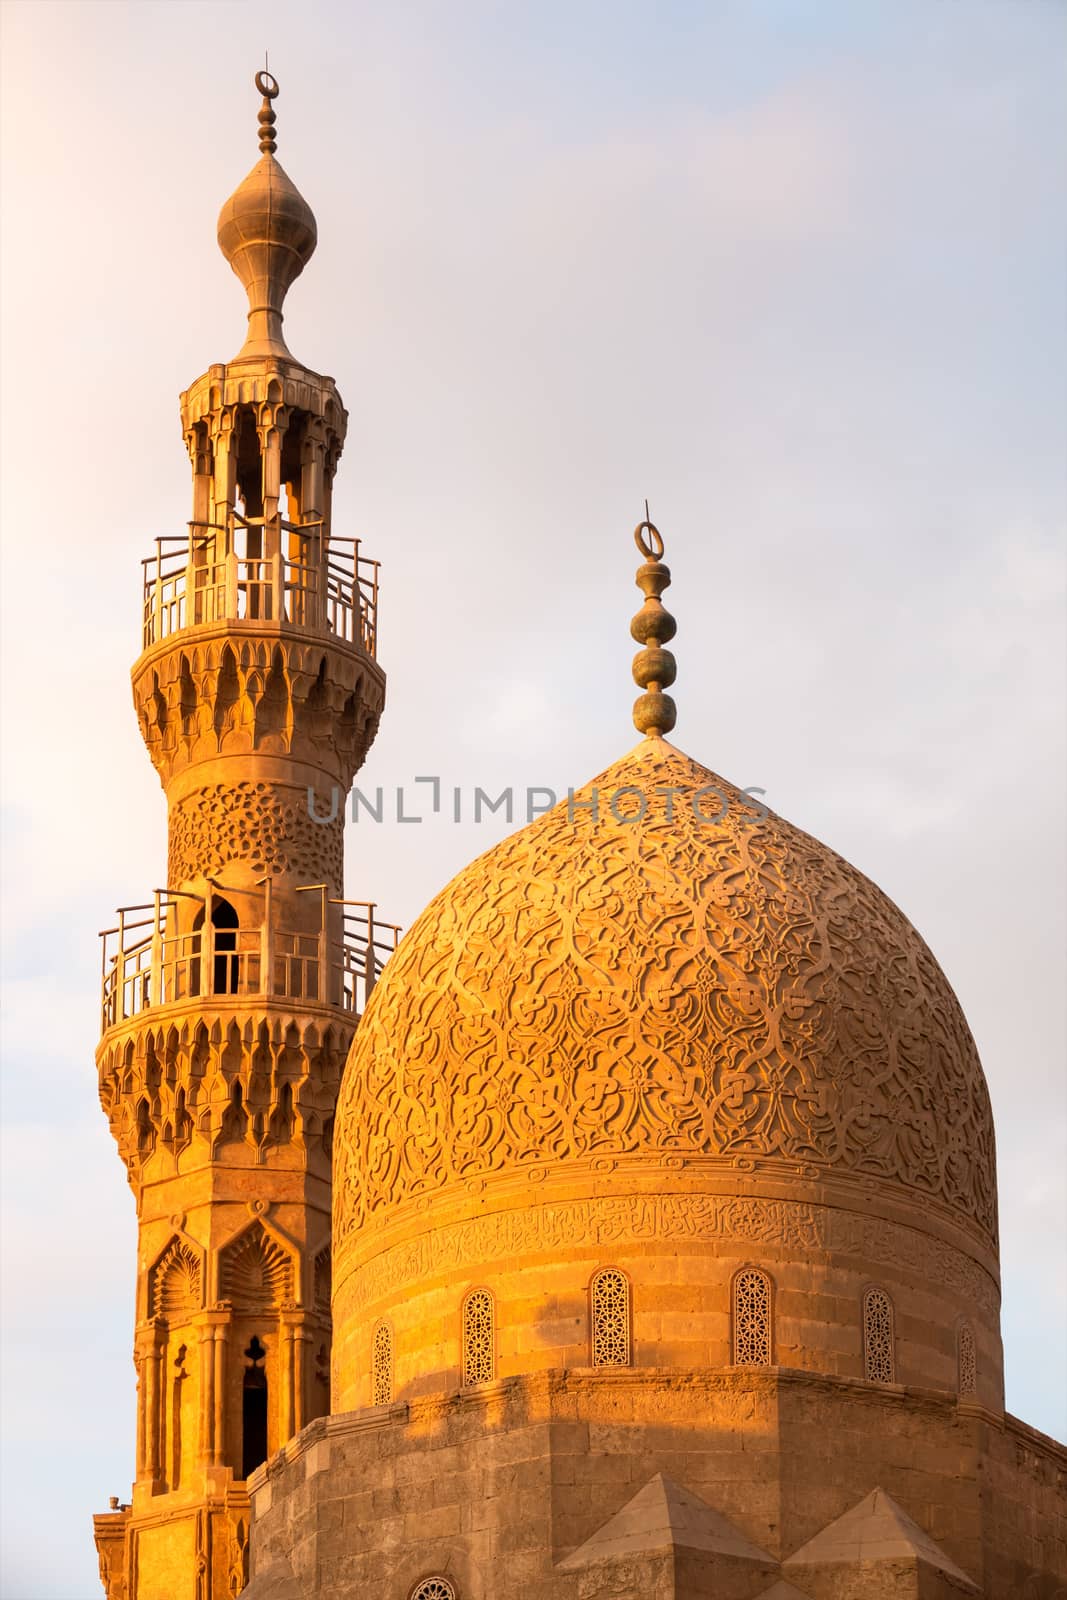 An image of the Aqsunqur mosque in Cairo Egypt at sunset